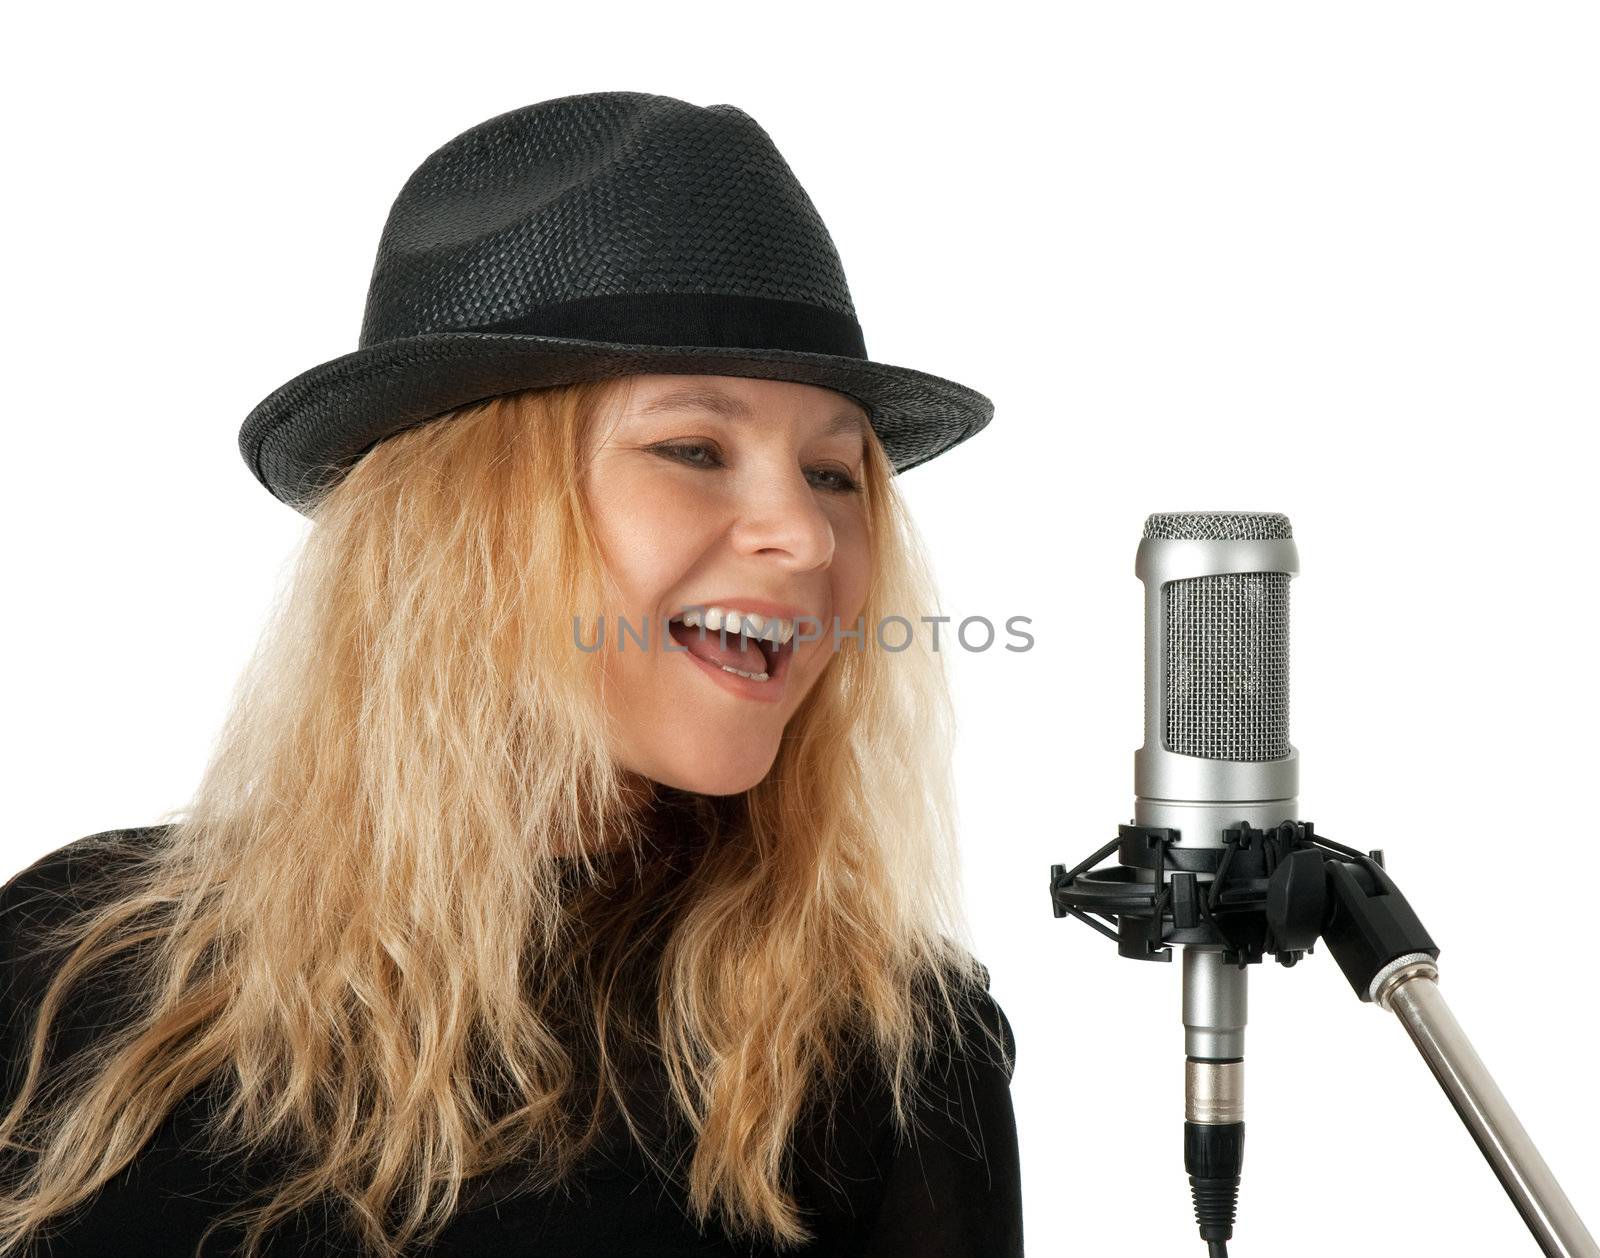 Female singer in black hat singing with studio microphone. Isolated on white background.